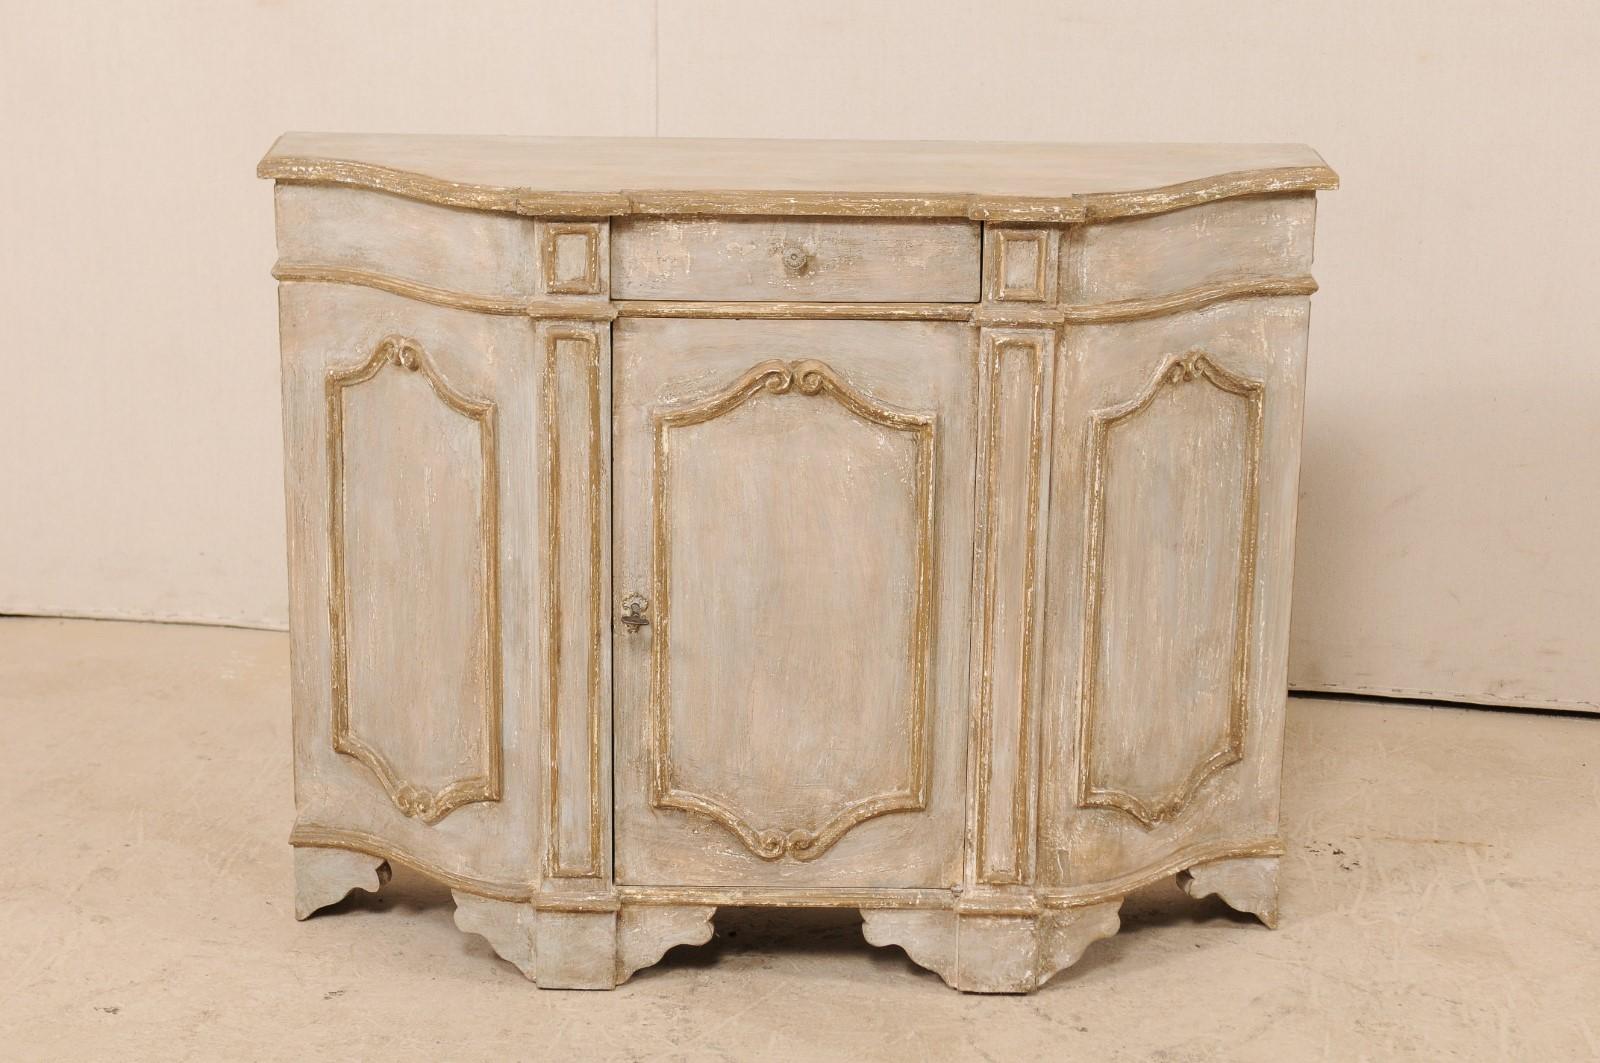 Carved Italian Midcentury Painted Wood Sideboard with Volute Accents